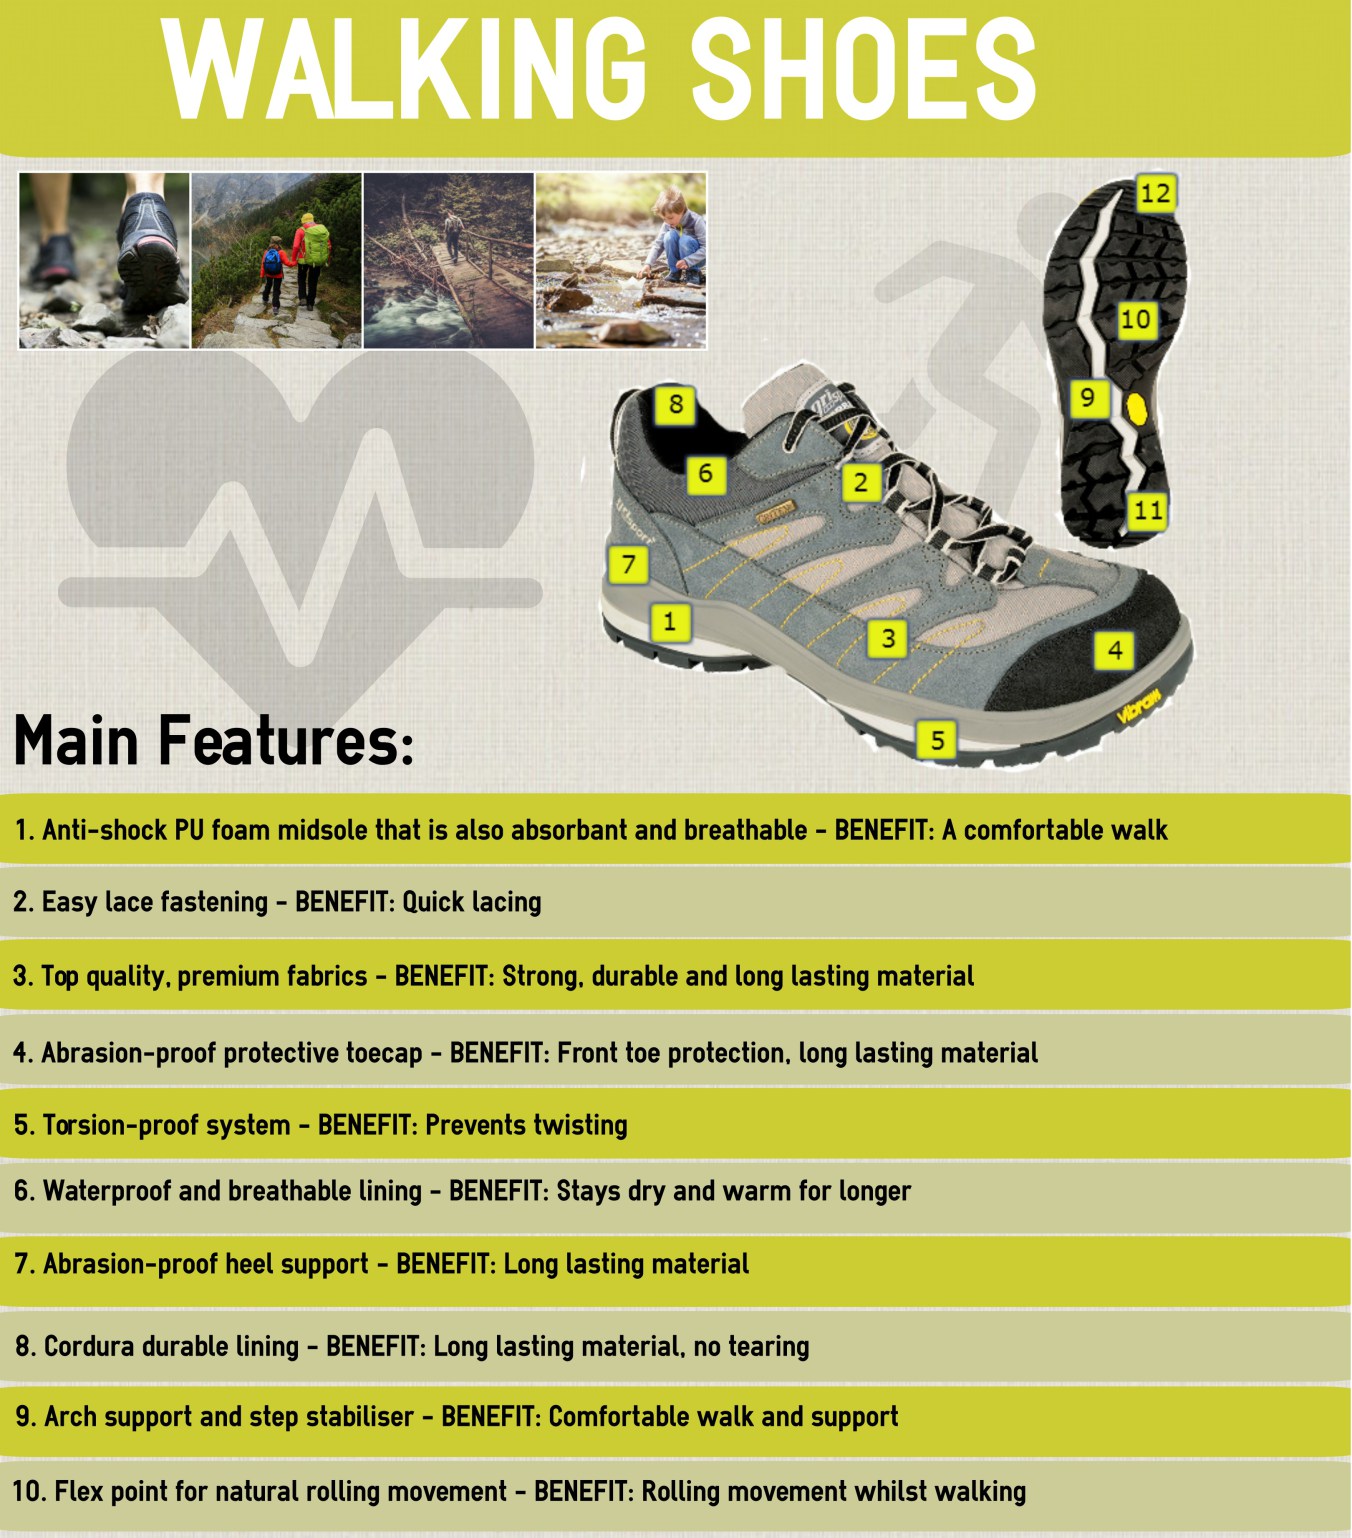 Key features for comfortable walking shoes